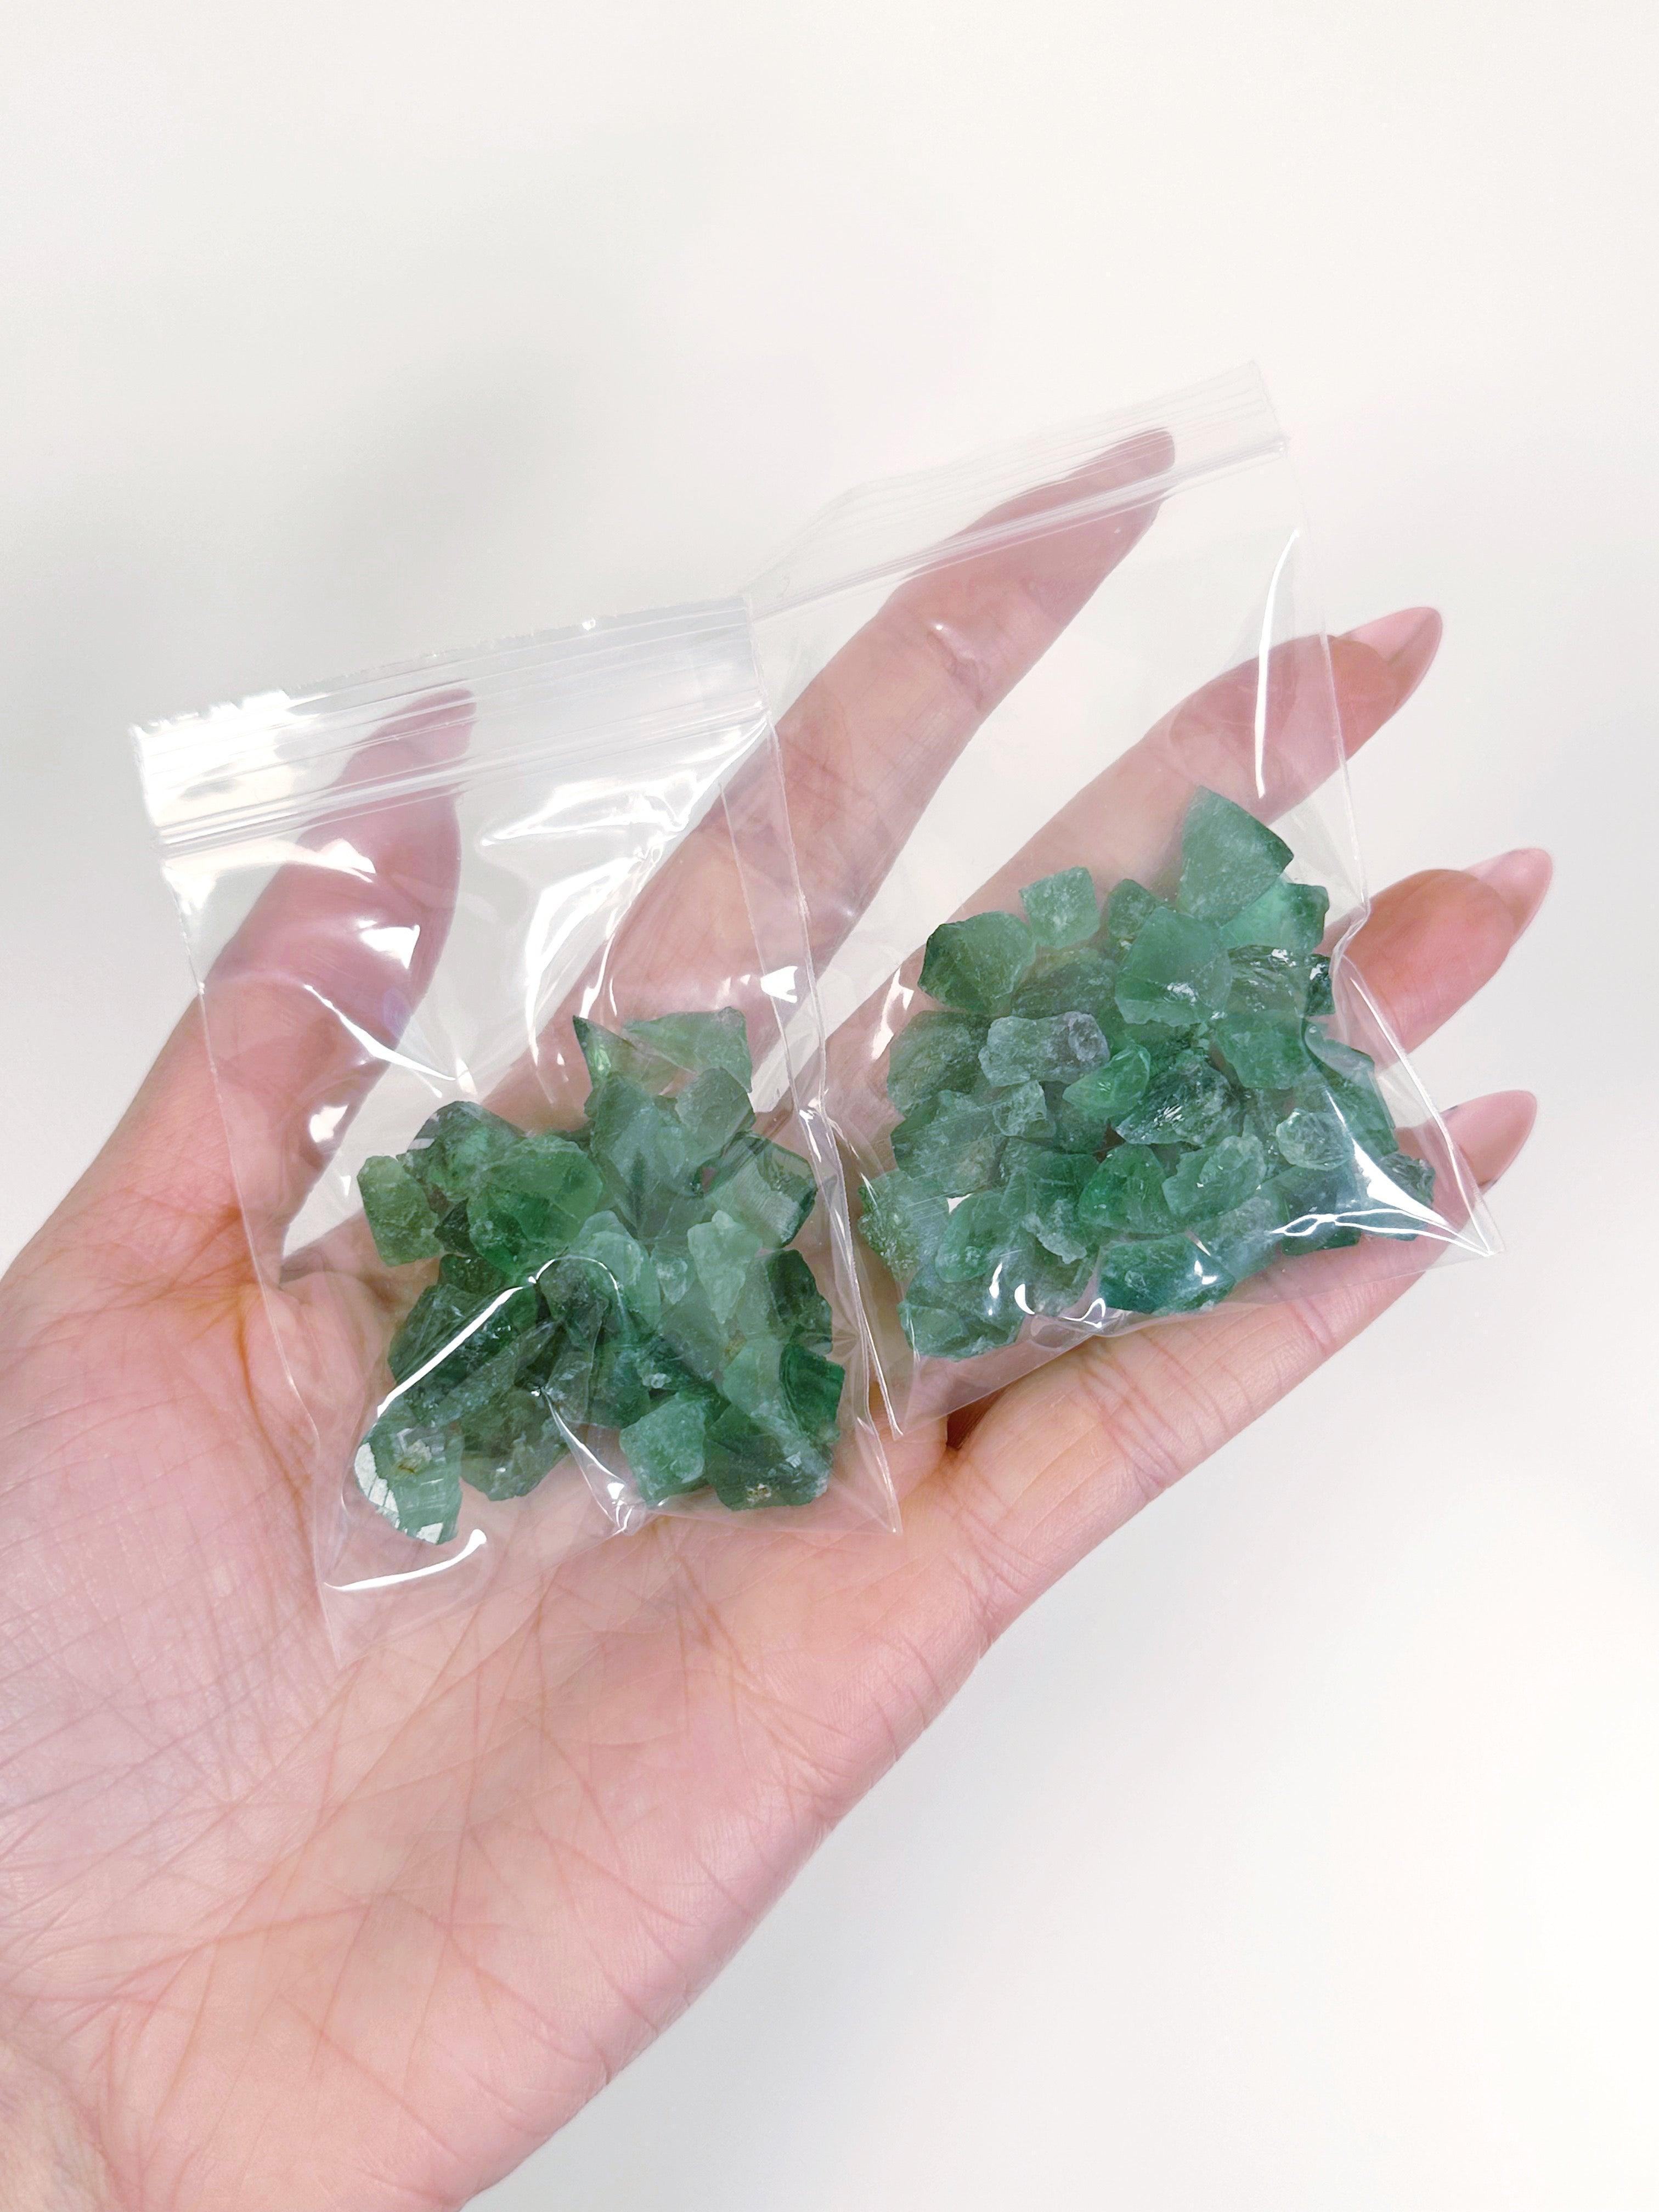 DIANA MARIA COLOR-CHANGING FLUORITE BAGGIE (30g) - 33 bday, 444 sale, baggie, diana maria, diana maria fluorite, diana maria mine, fluorite, gridding, holiday sale, new year sale, raw crystal, raw stone - The Mineral Maven